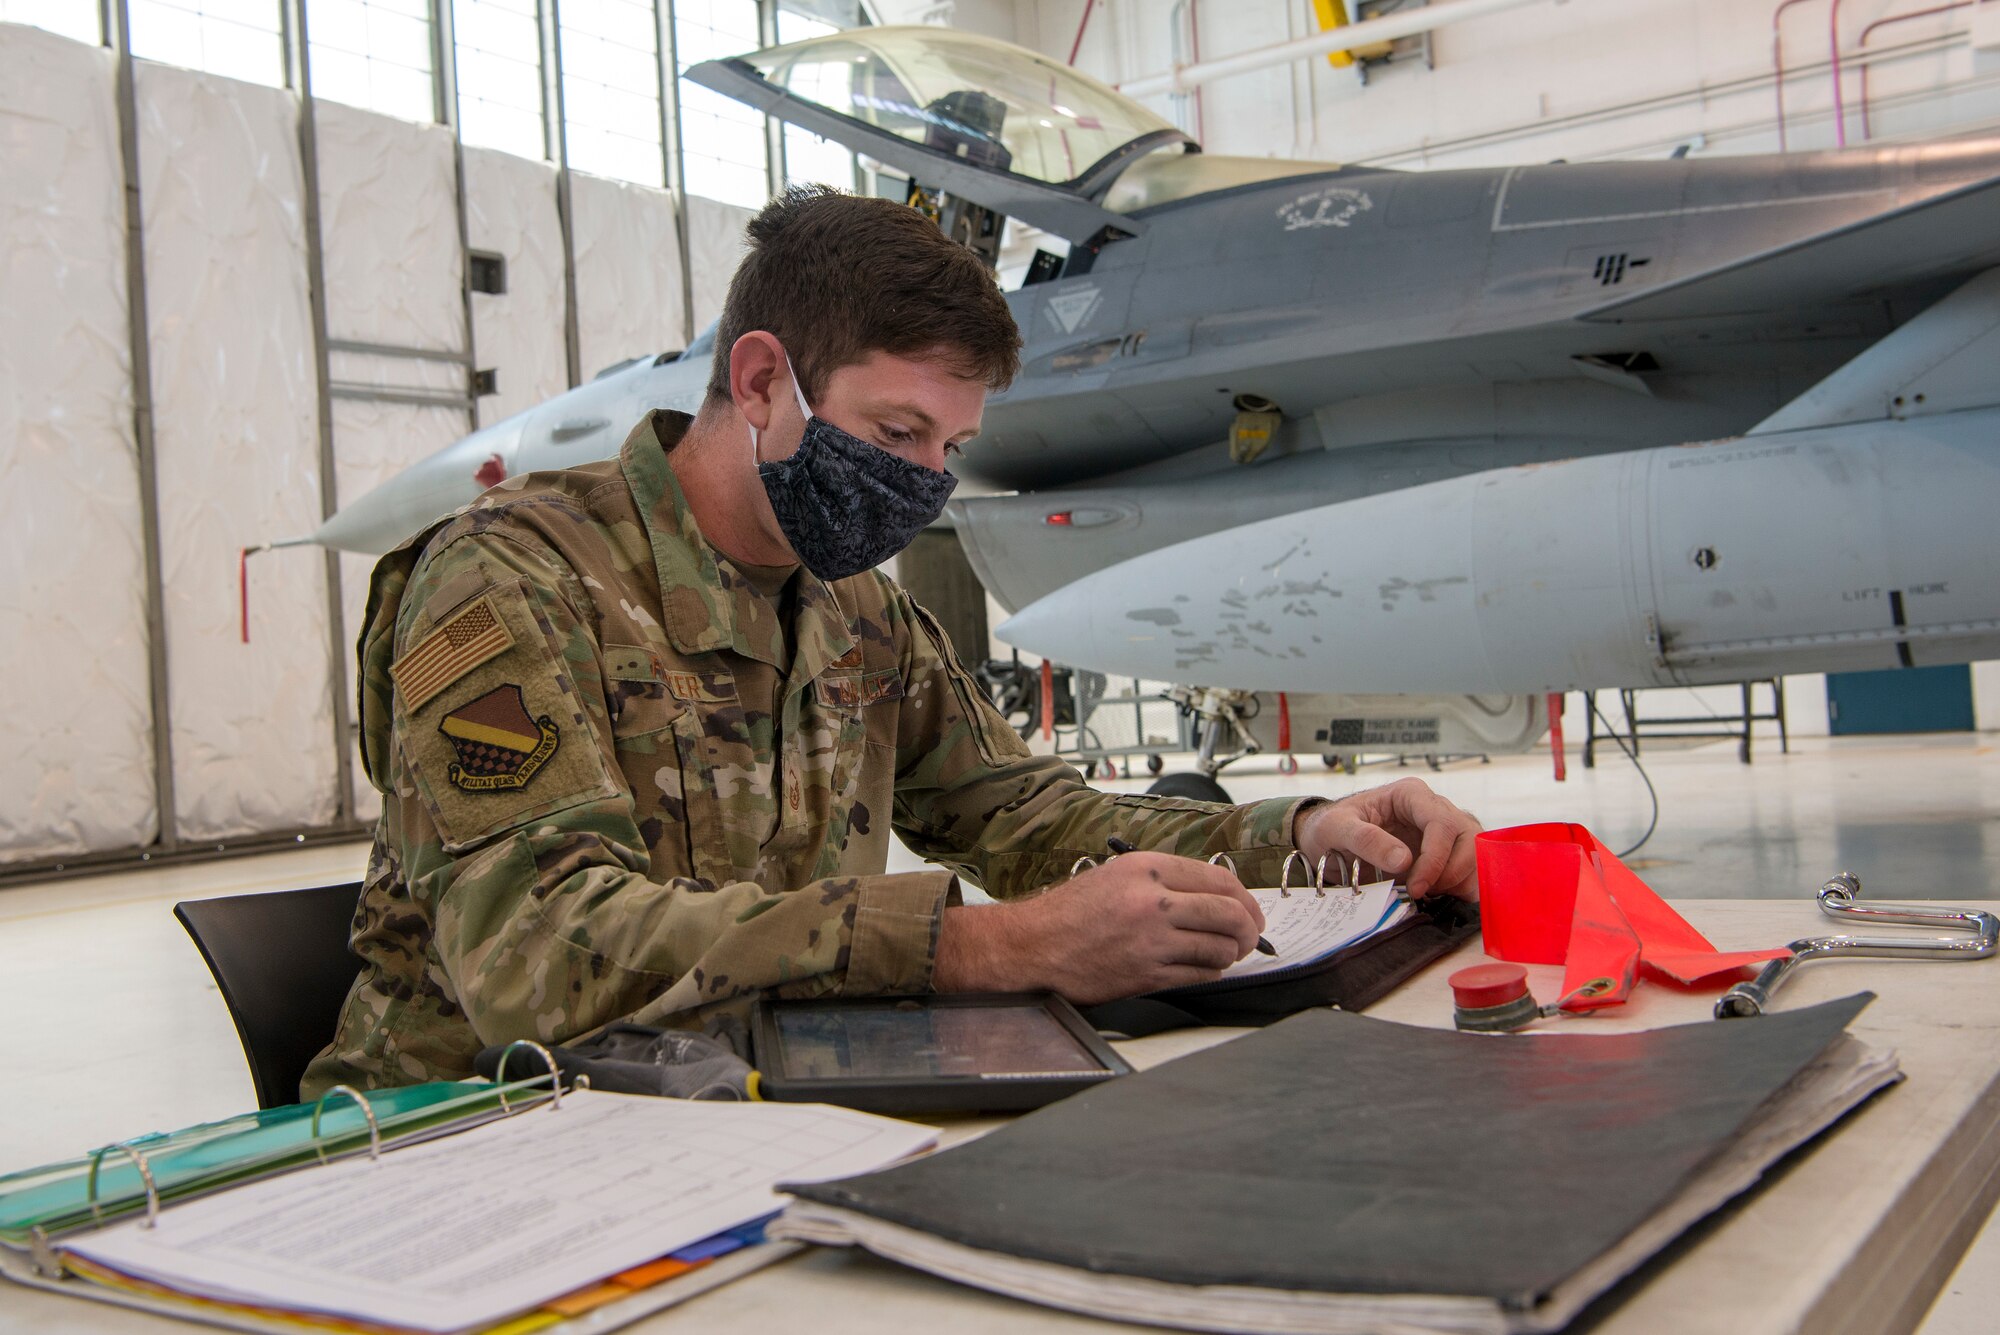 Maintenance airman working with mask on